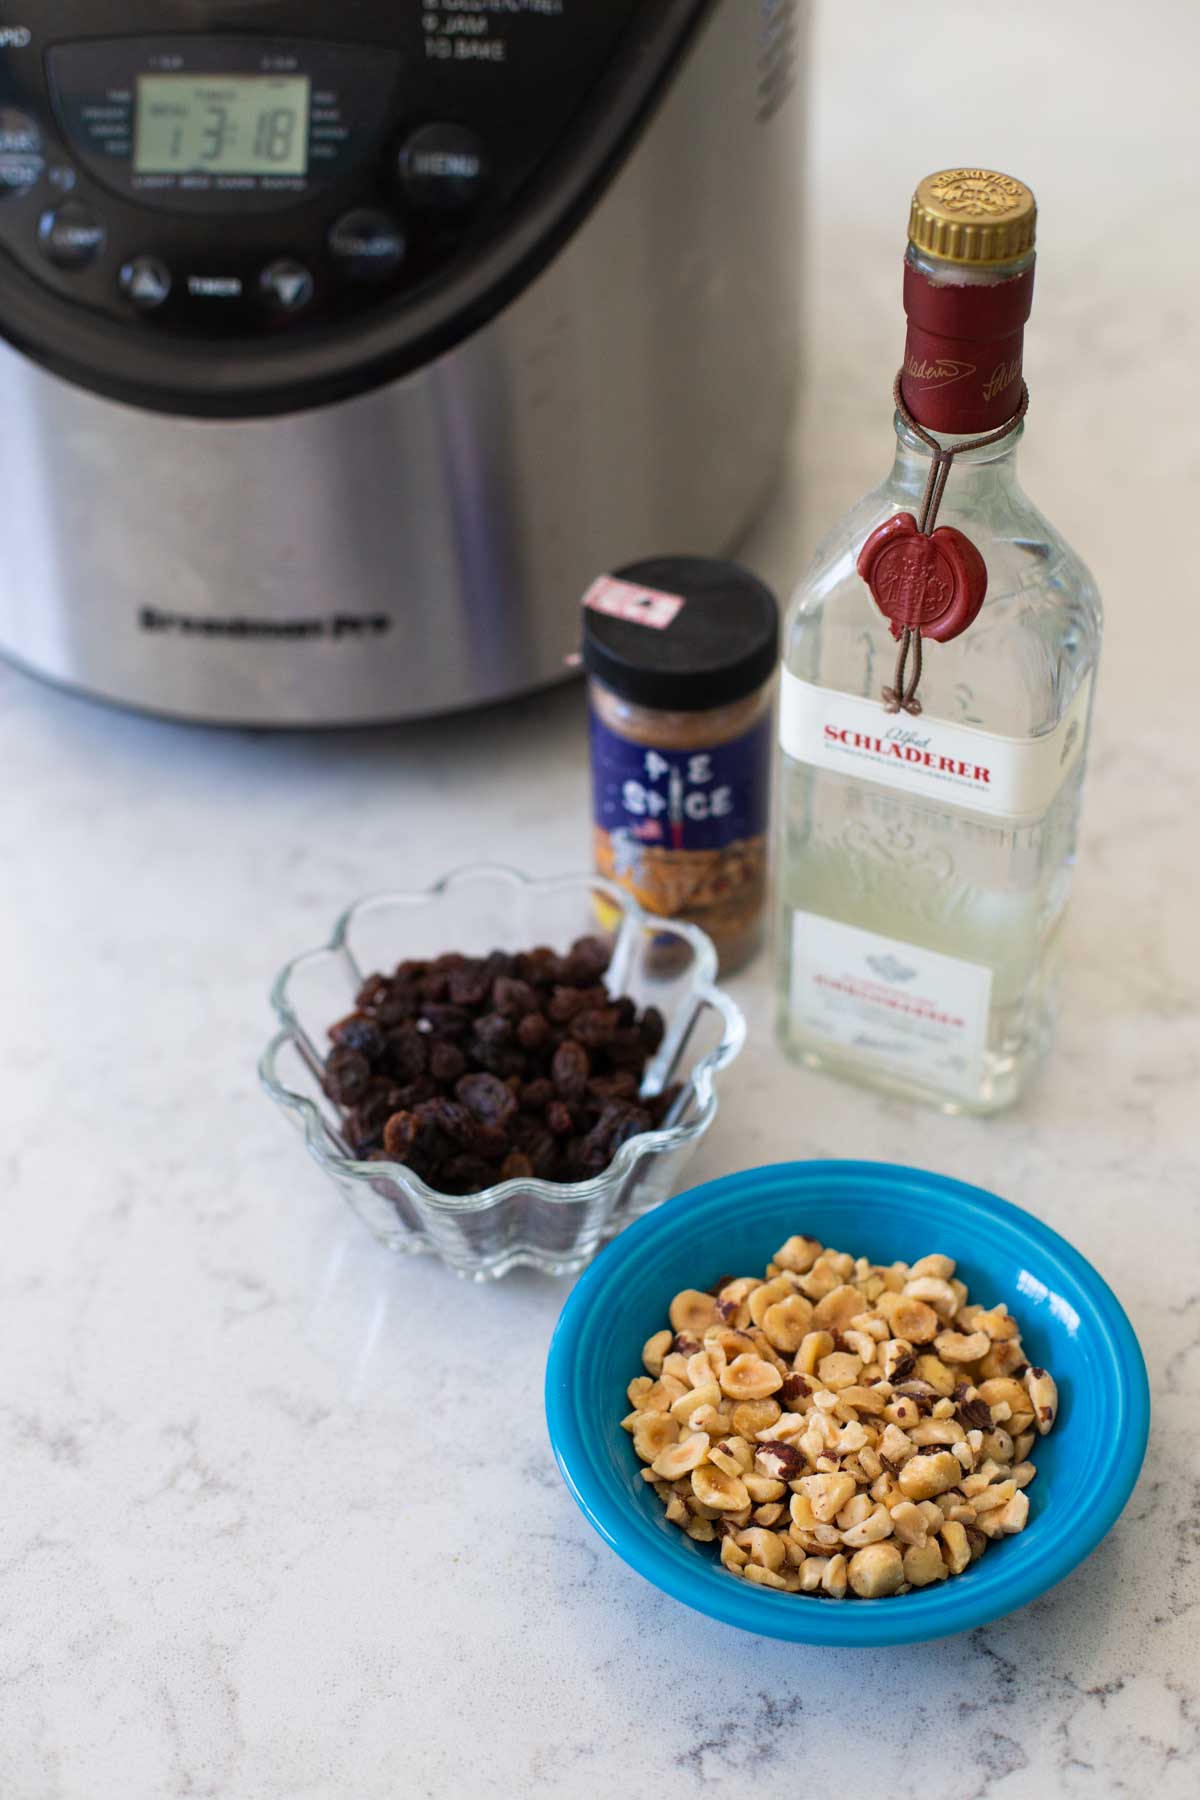 Chopped hazelnuts, raisins, kirsch, and spices sit in front of a bread maker.